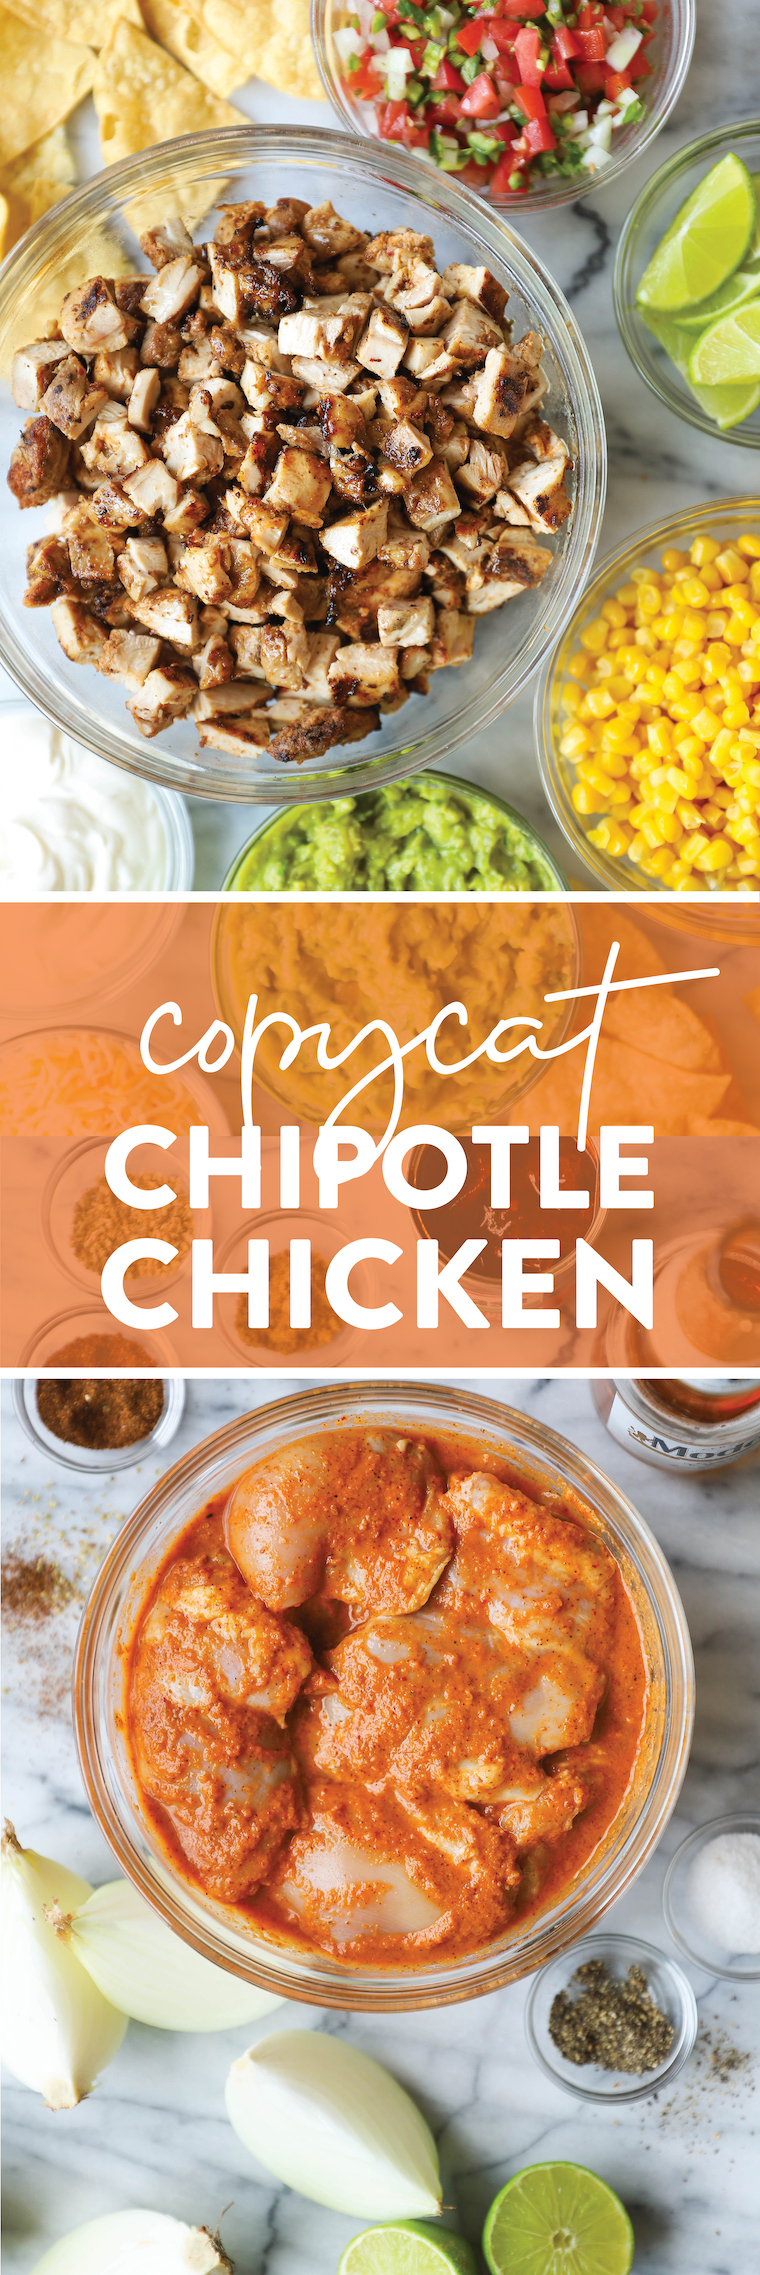 Copycat Chipotle Chicken - Seriously SO SO GOOD. Perfect for burritos and/or burrito bowls! And it's even better than Chipotle, but shhhhh!